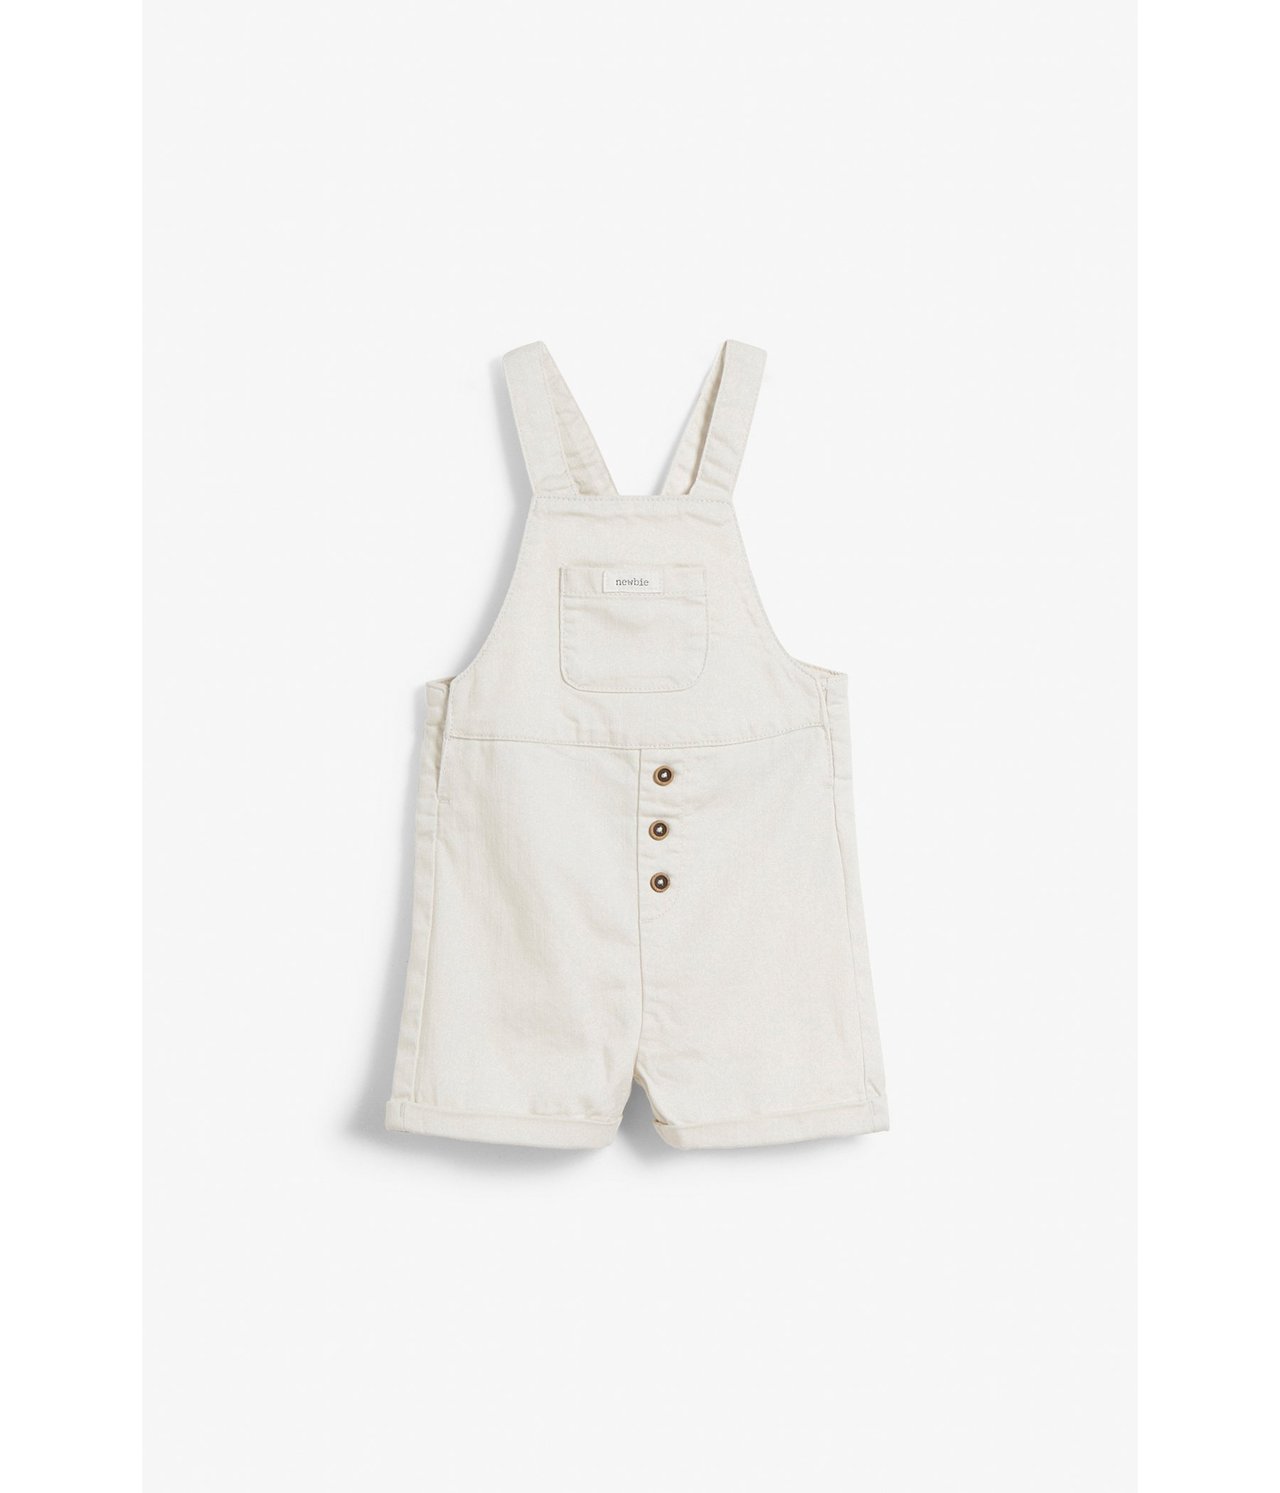 Hängselshorts baby Offwhite - null - 1